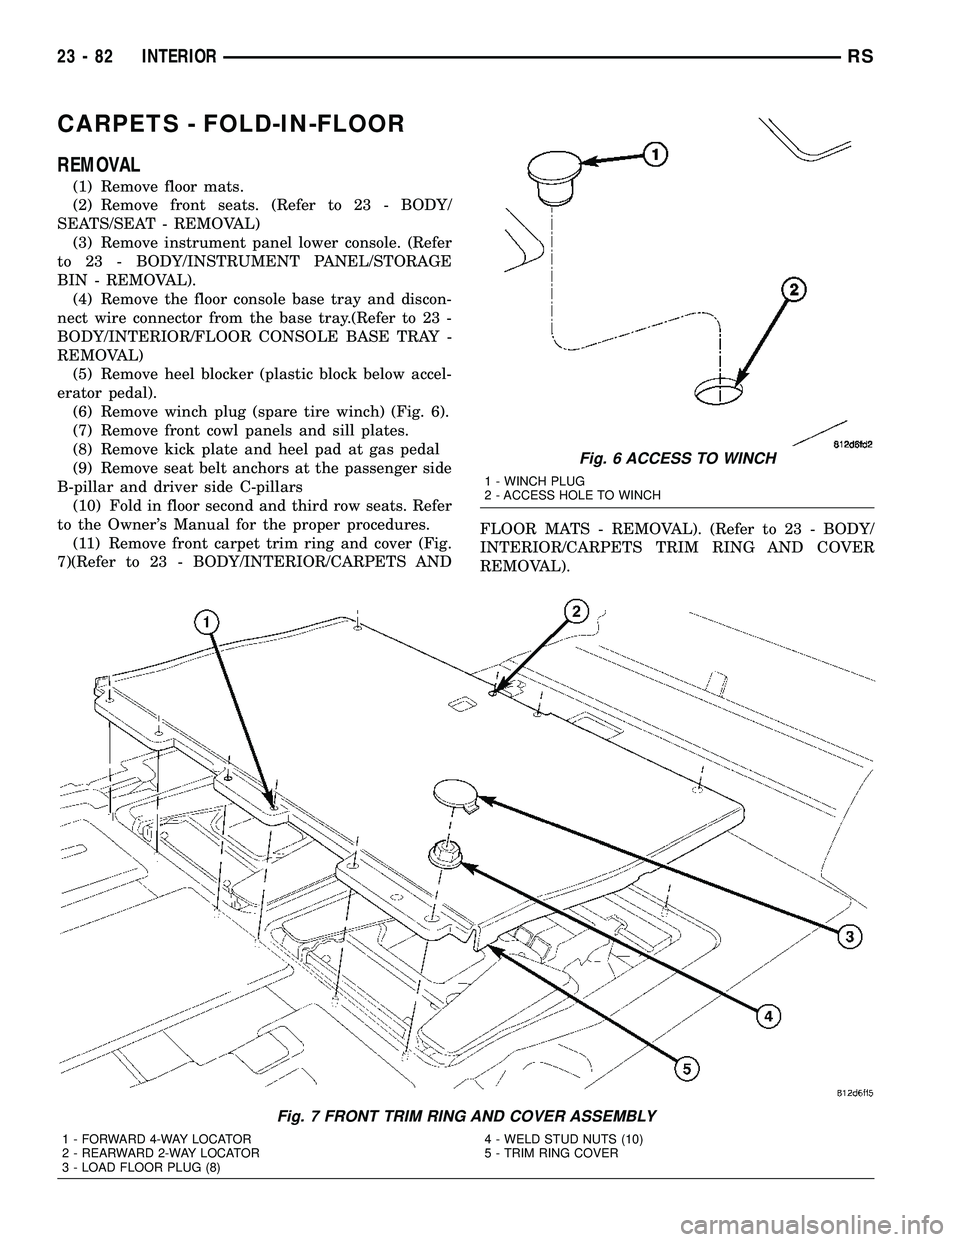 CHRYSLER VOYAGER 2005  Service Manual CARPETS - FOLD-IN-FLOOR
REMOVAL
(1) Remove floor mats.
(2) Remove front seats. (Refer to 23 - BODY/
SEATS/SEAT - REMOVAL)
(3) Remove instrument panel lower console. (Refer
to 23 - BODY/INSTRUMENT PANE